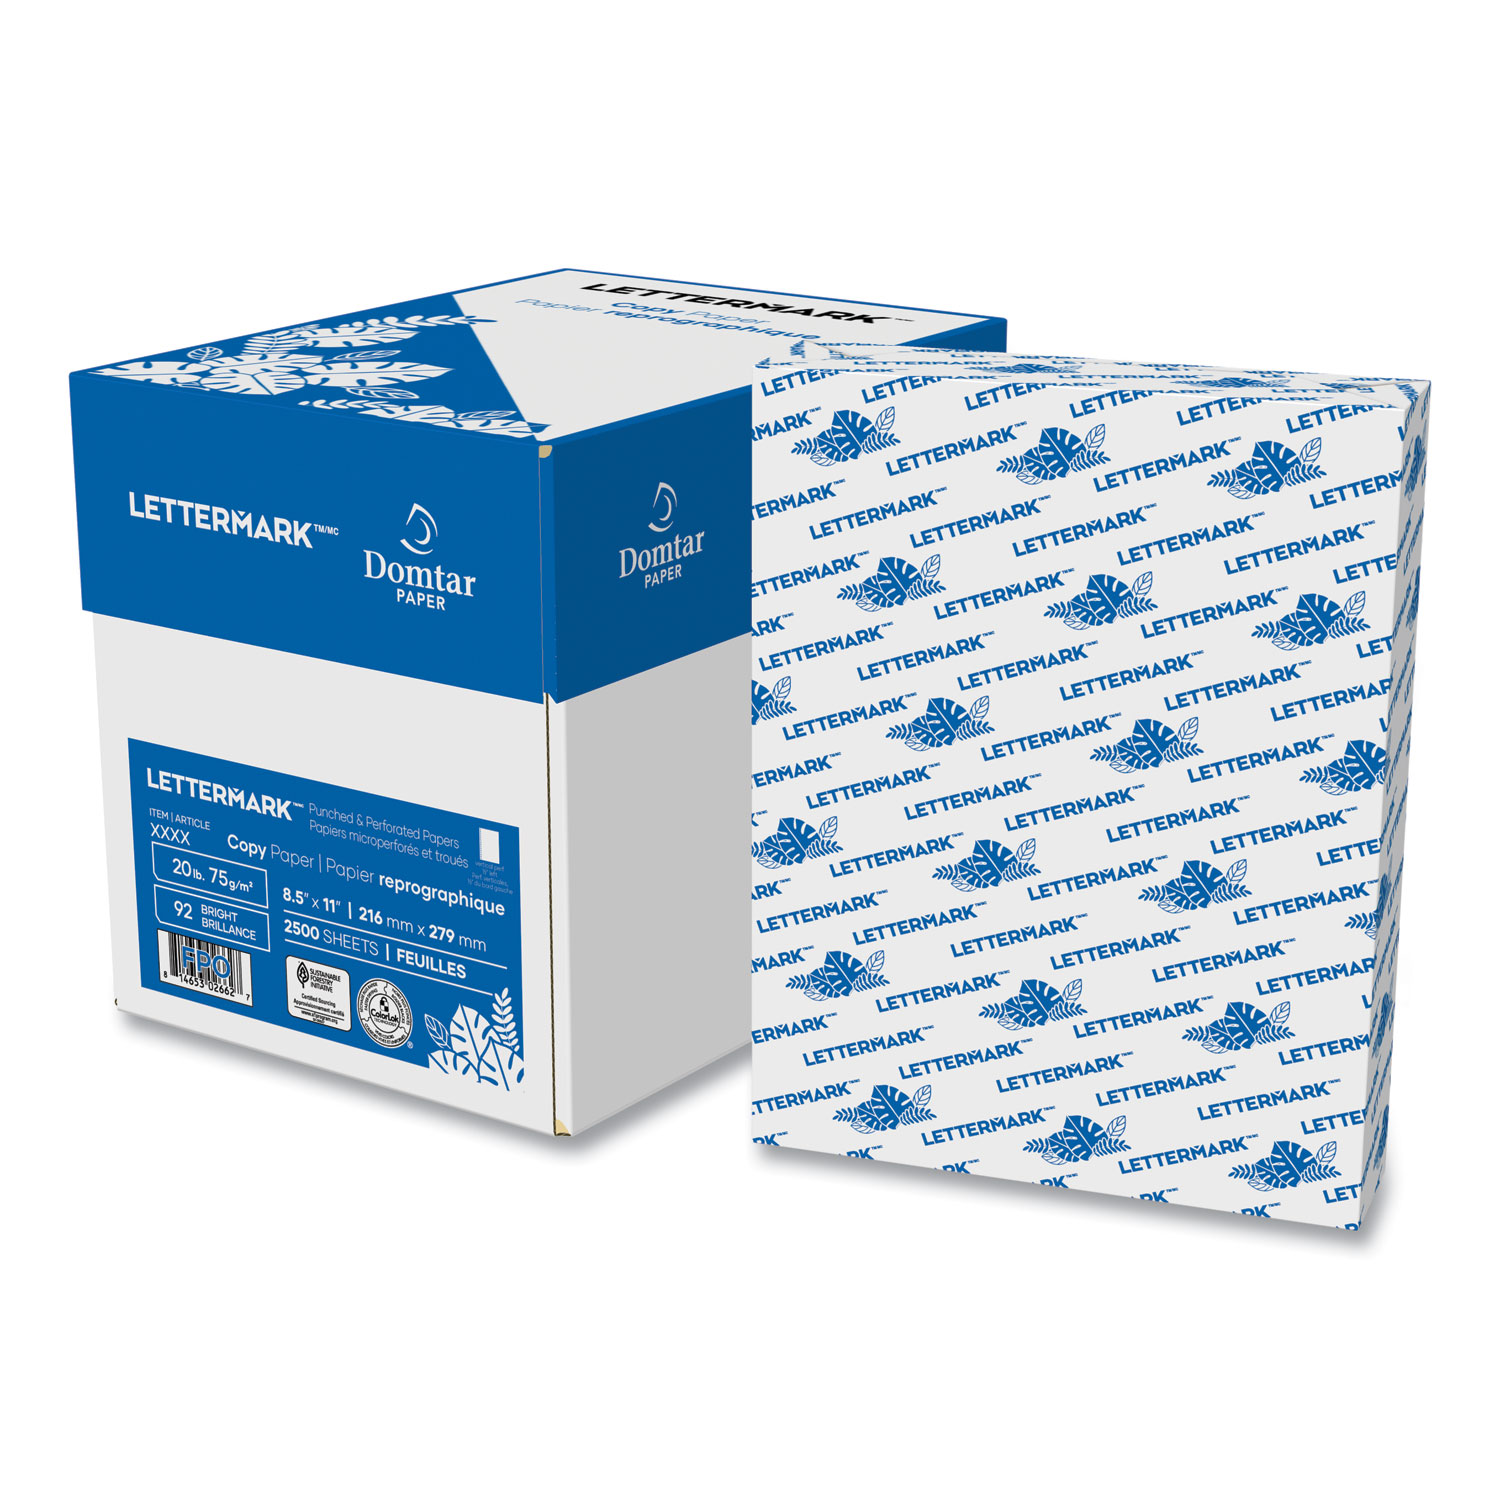 Multifunctional Printer Paper A4 White Box of 2500 Sheets (5 Reams)